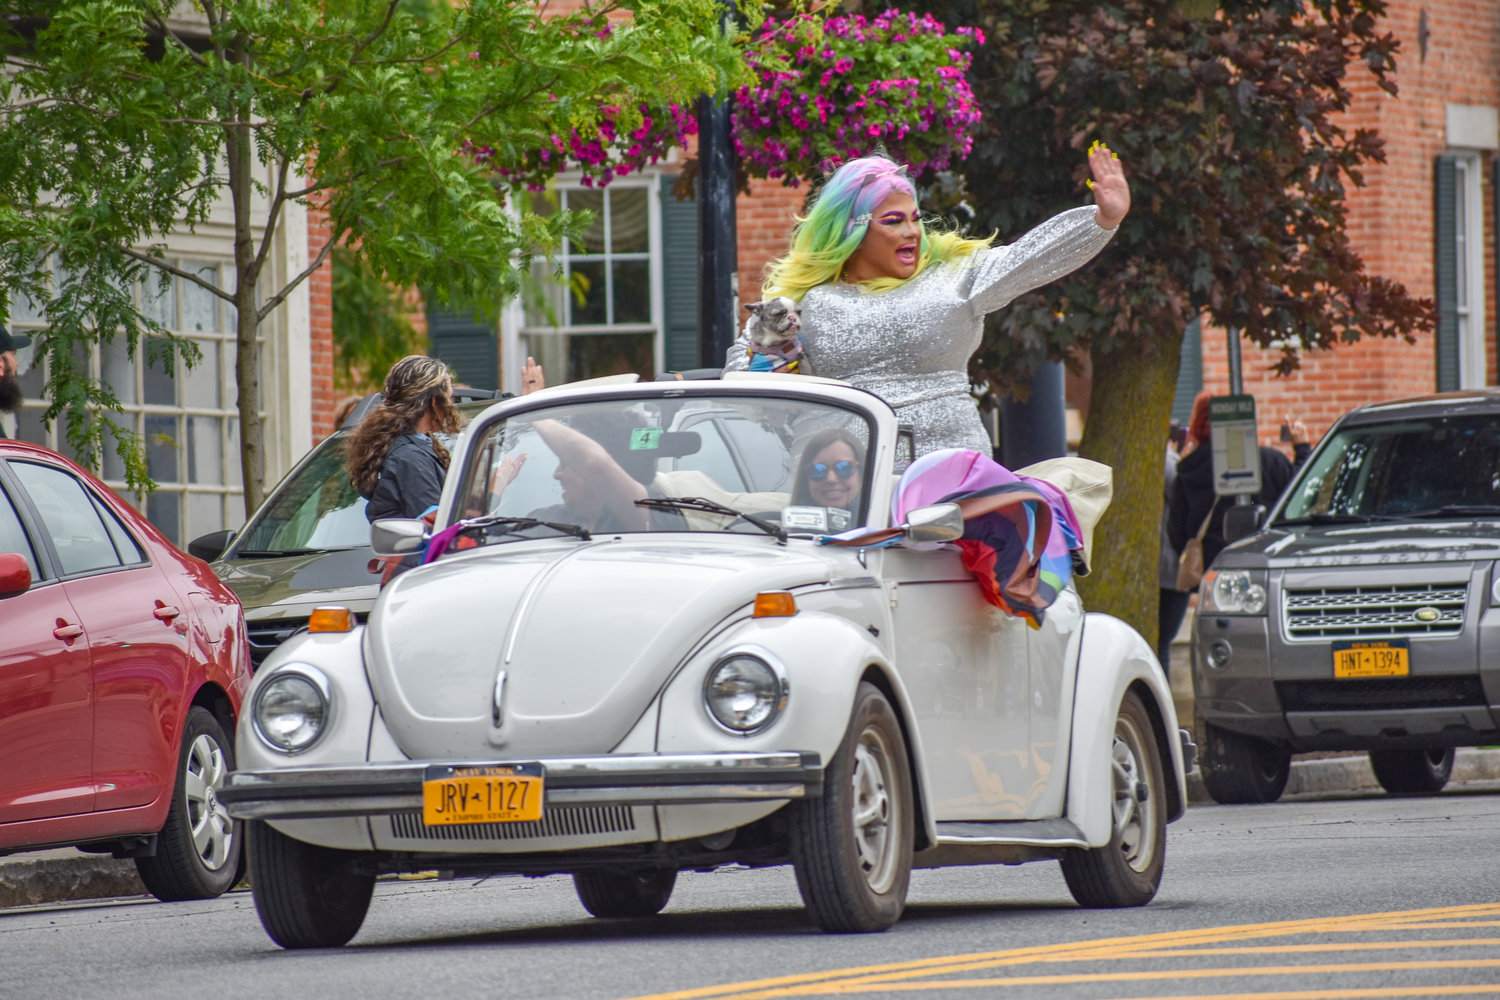 Drag Queen Anita Buffem — played by Travis Barr, LGBTQ member of the Caz Pride Committee — lead the pride parade in the village on Saturday.